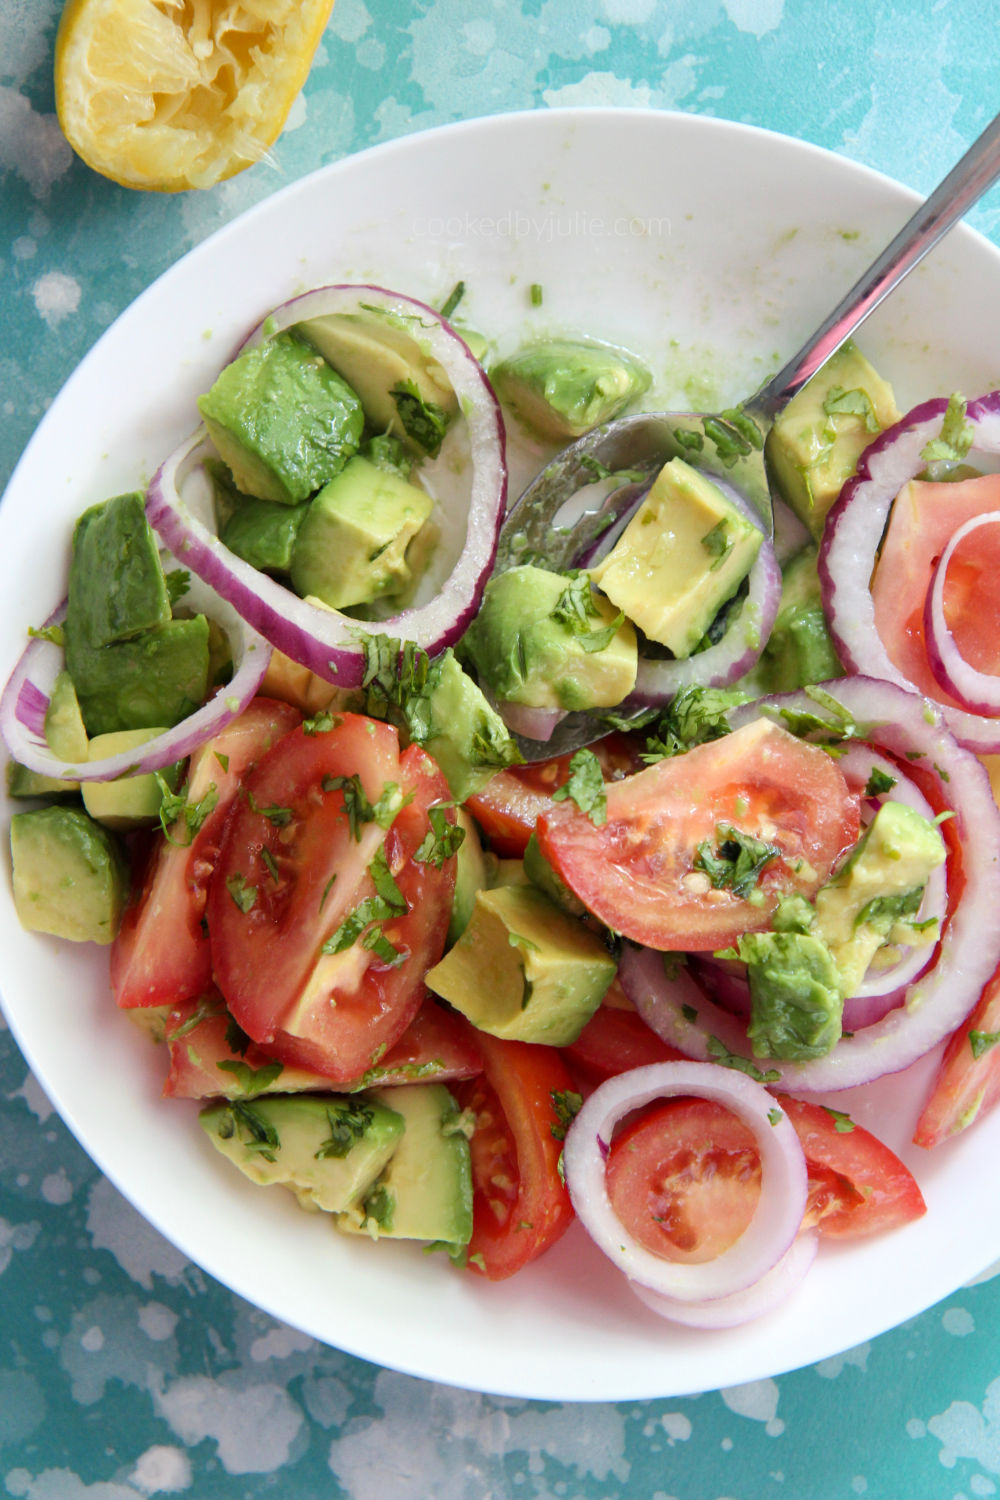 tomatoes and avocado salad in a white bowl with a lemon on the side